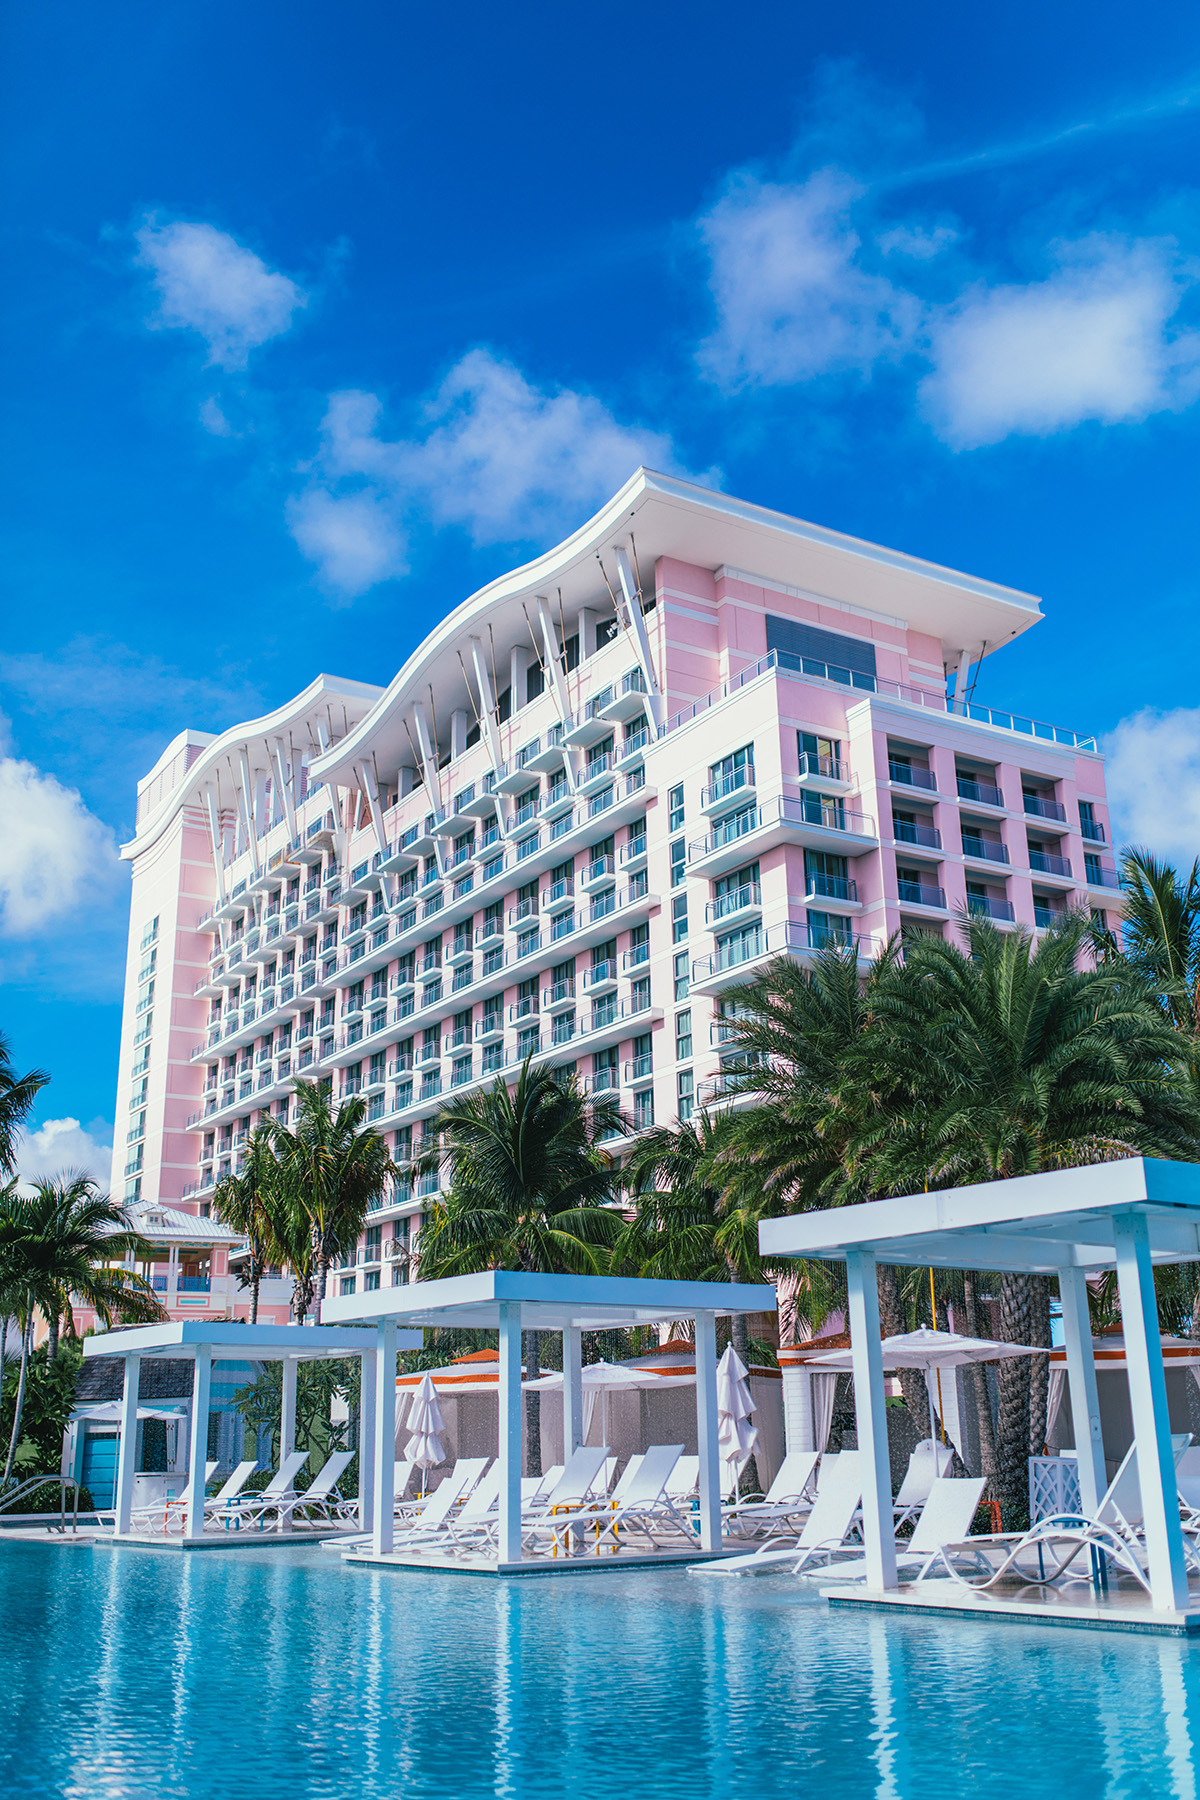 Exterior of luxury beach-front hotel with pink facade 